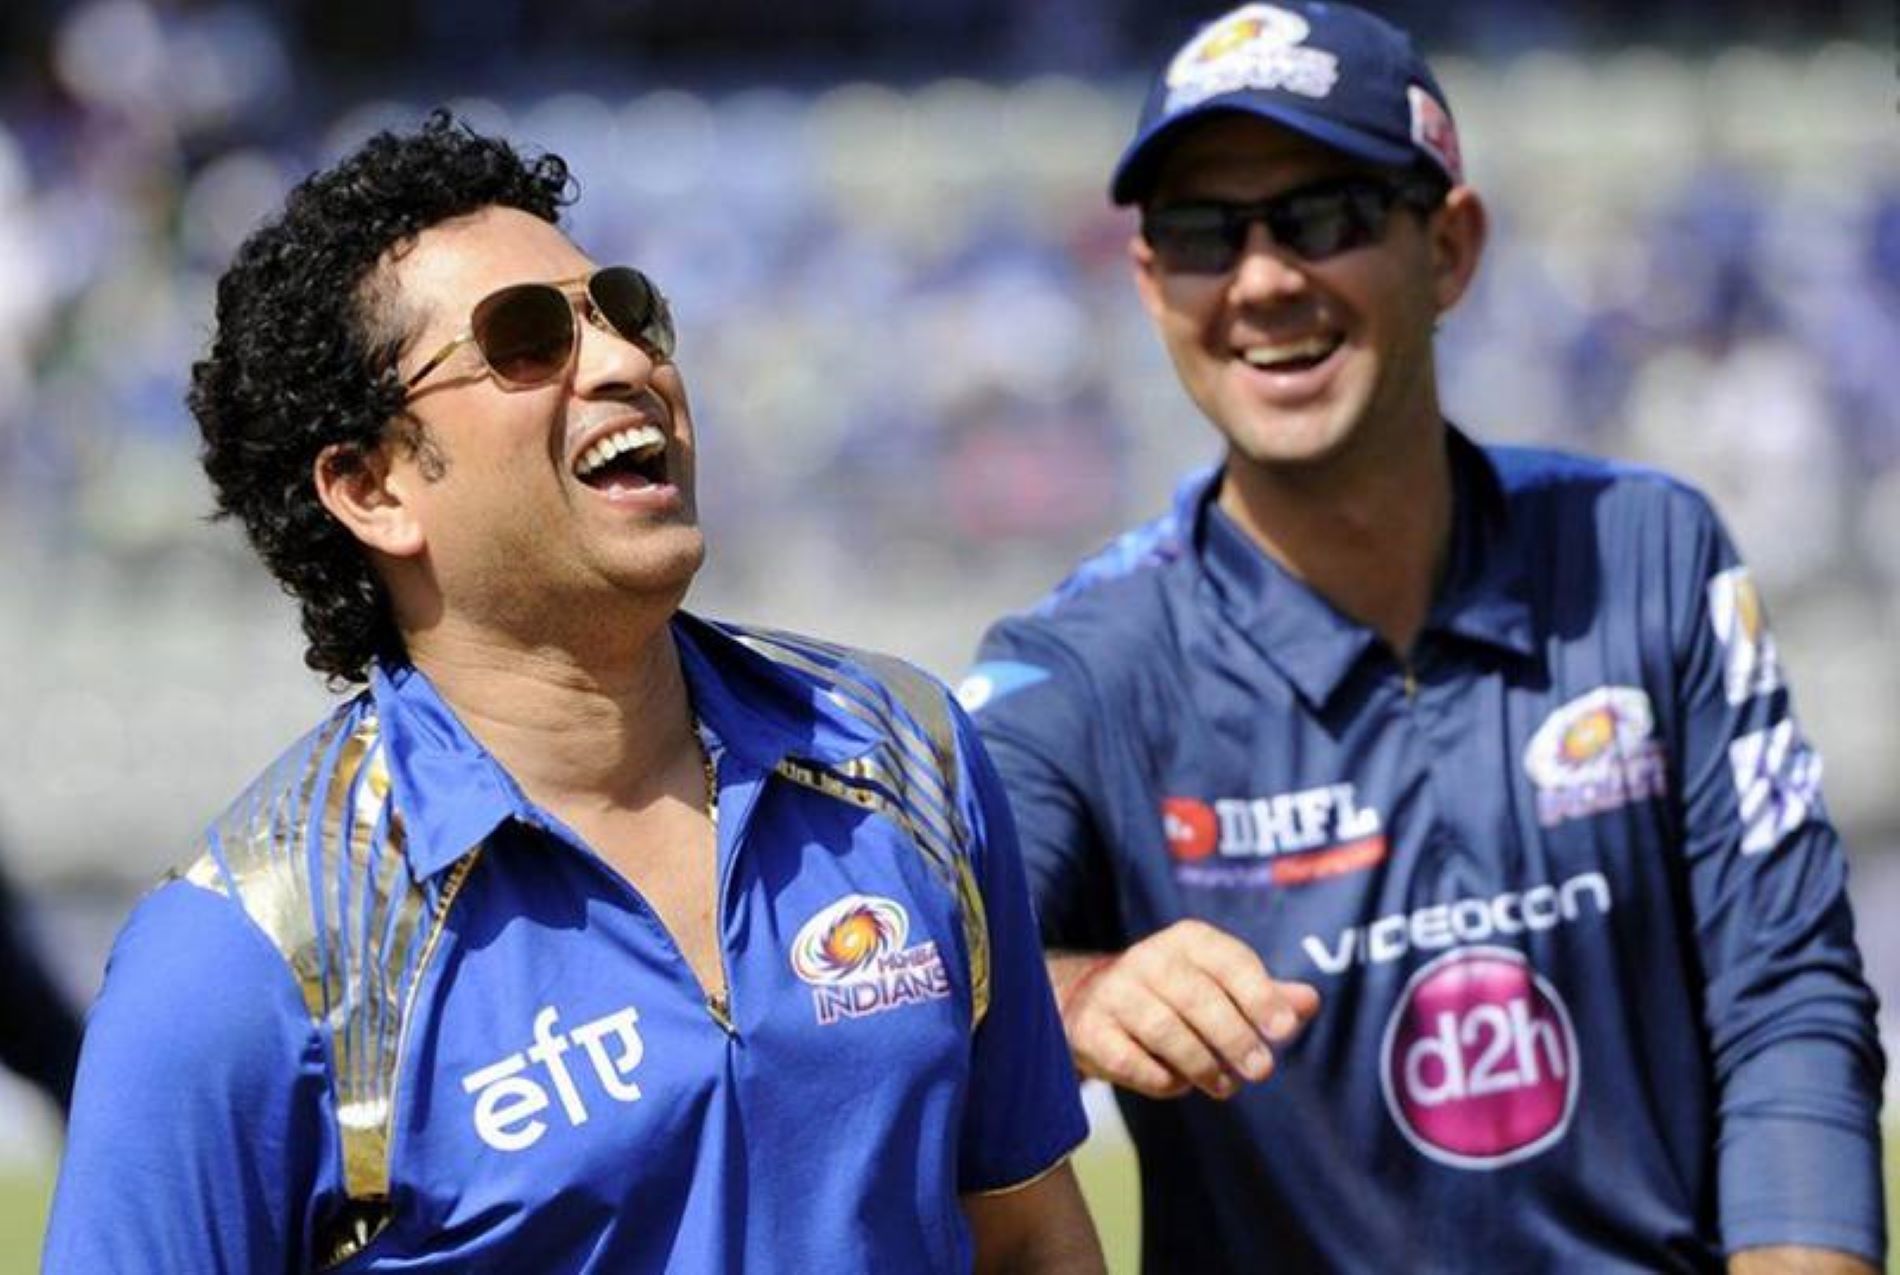 After being rivals for years, Sachin Tendulkar and Ricky Ponting shared a dressing room for MI in 2013